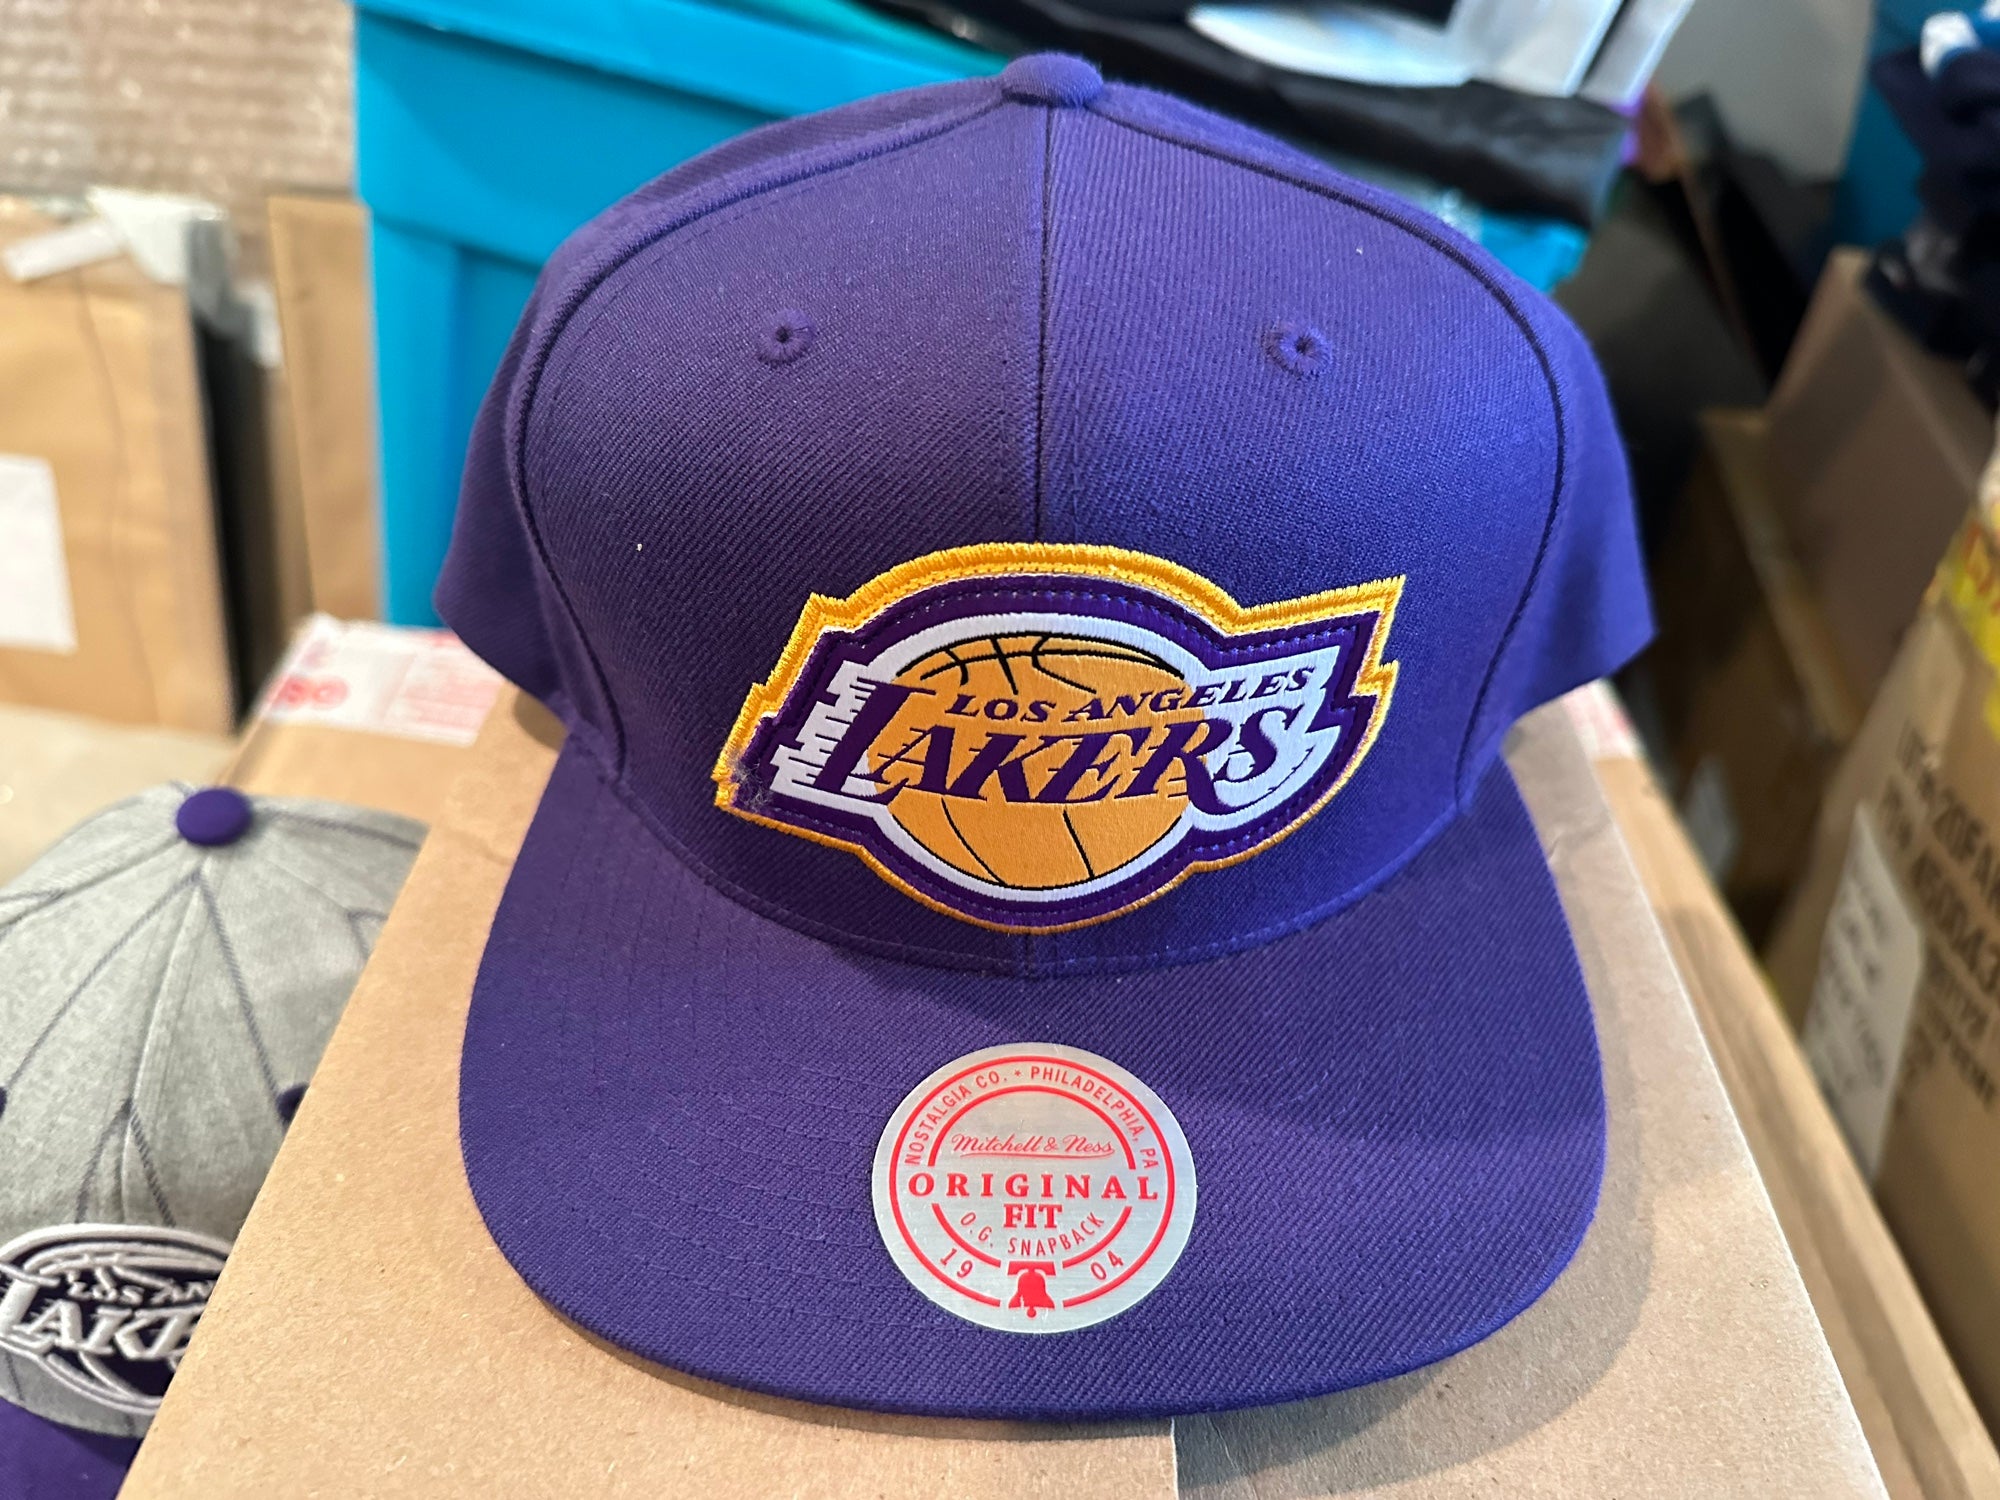 mitchell & ness lakers hat